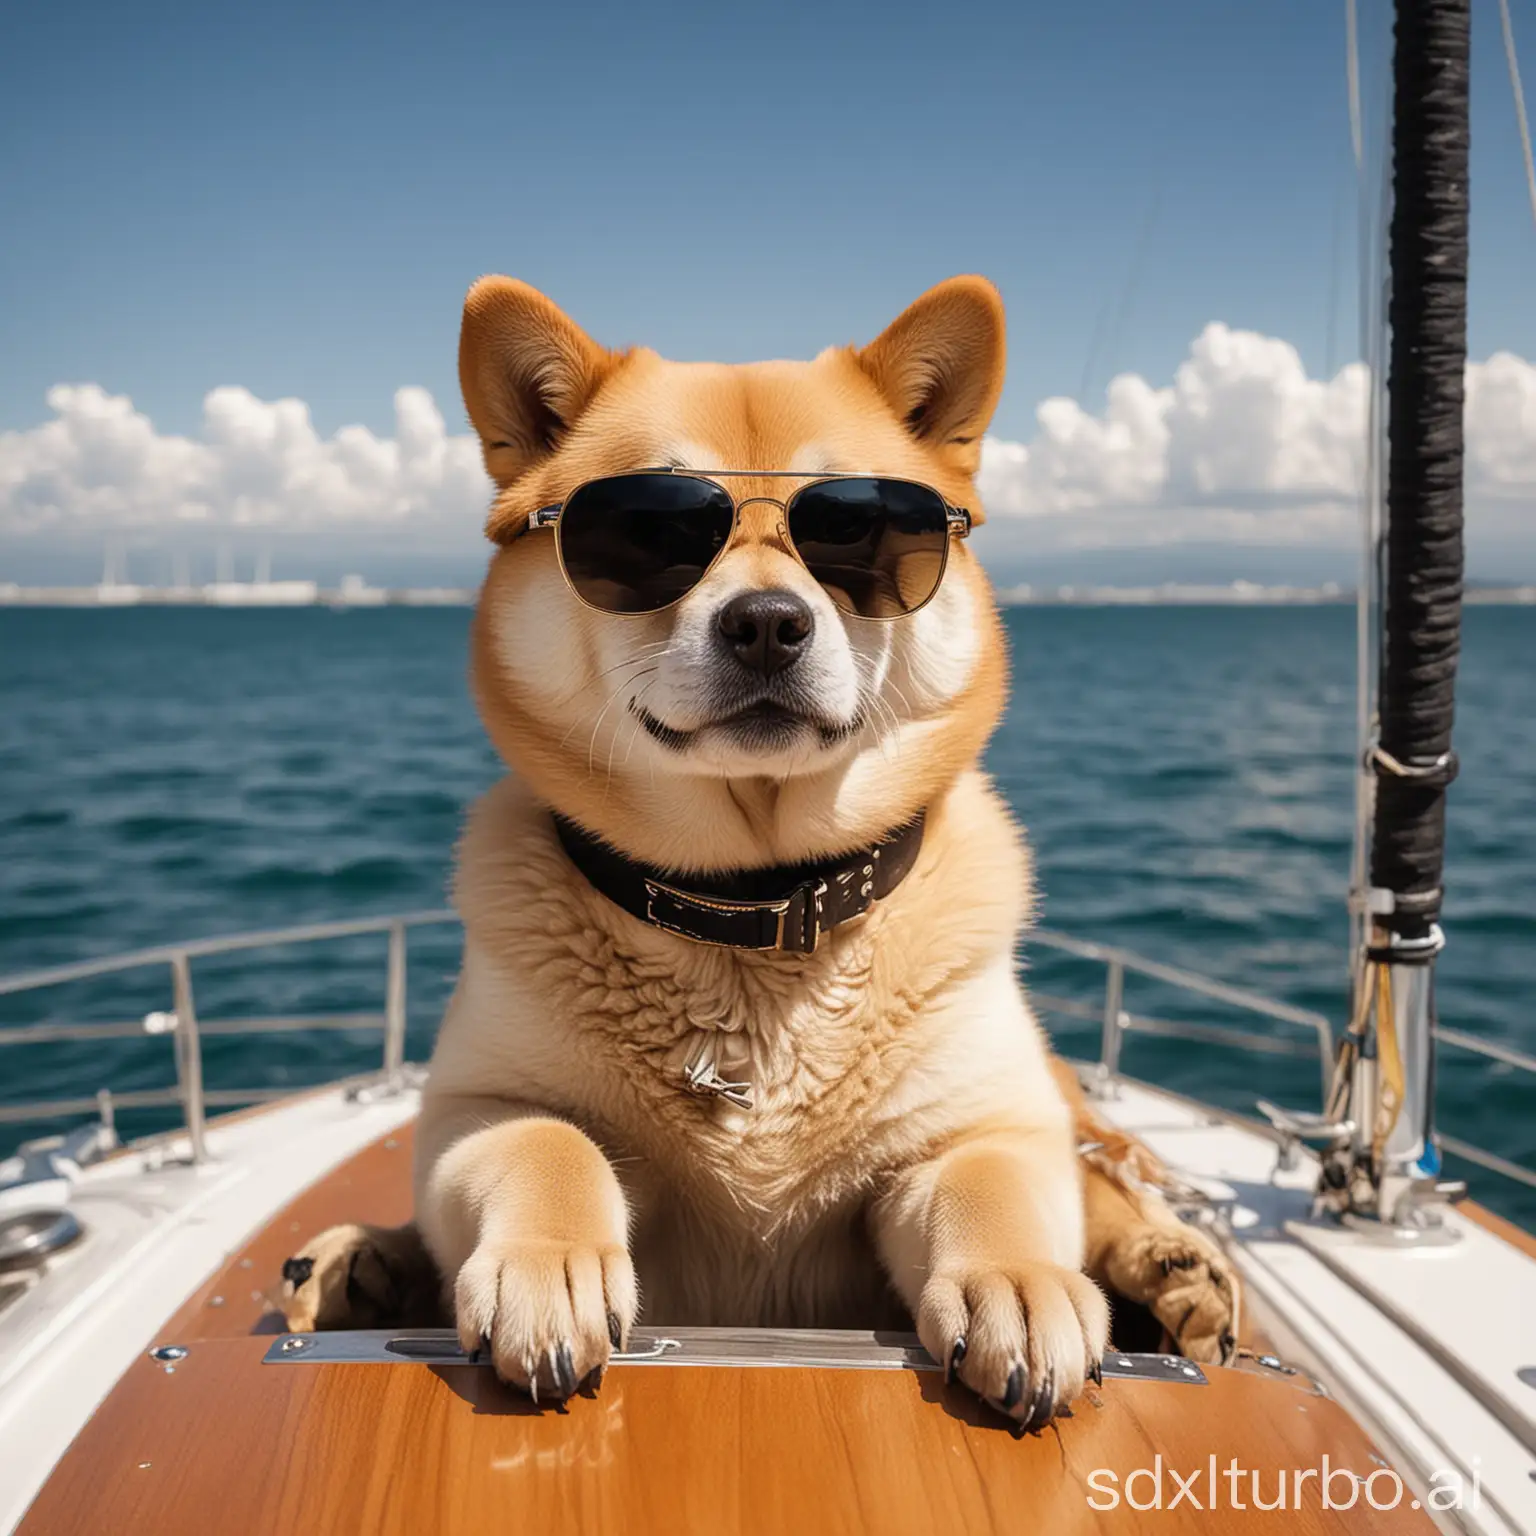 Meme Doge dog on sport yacht keelboart while wearing sunglasses in a cool way